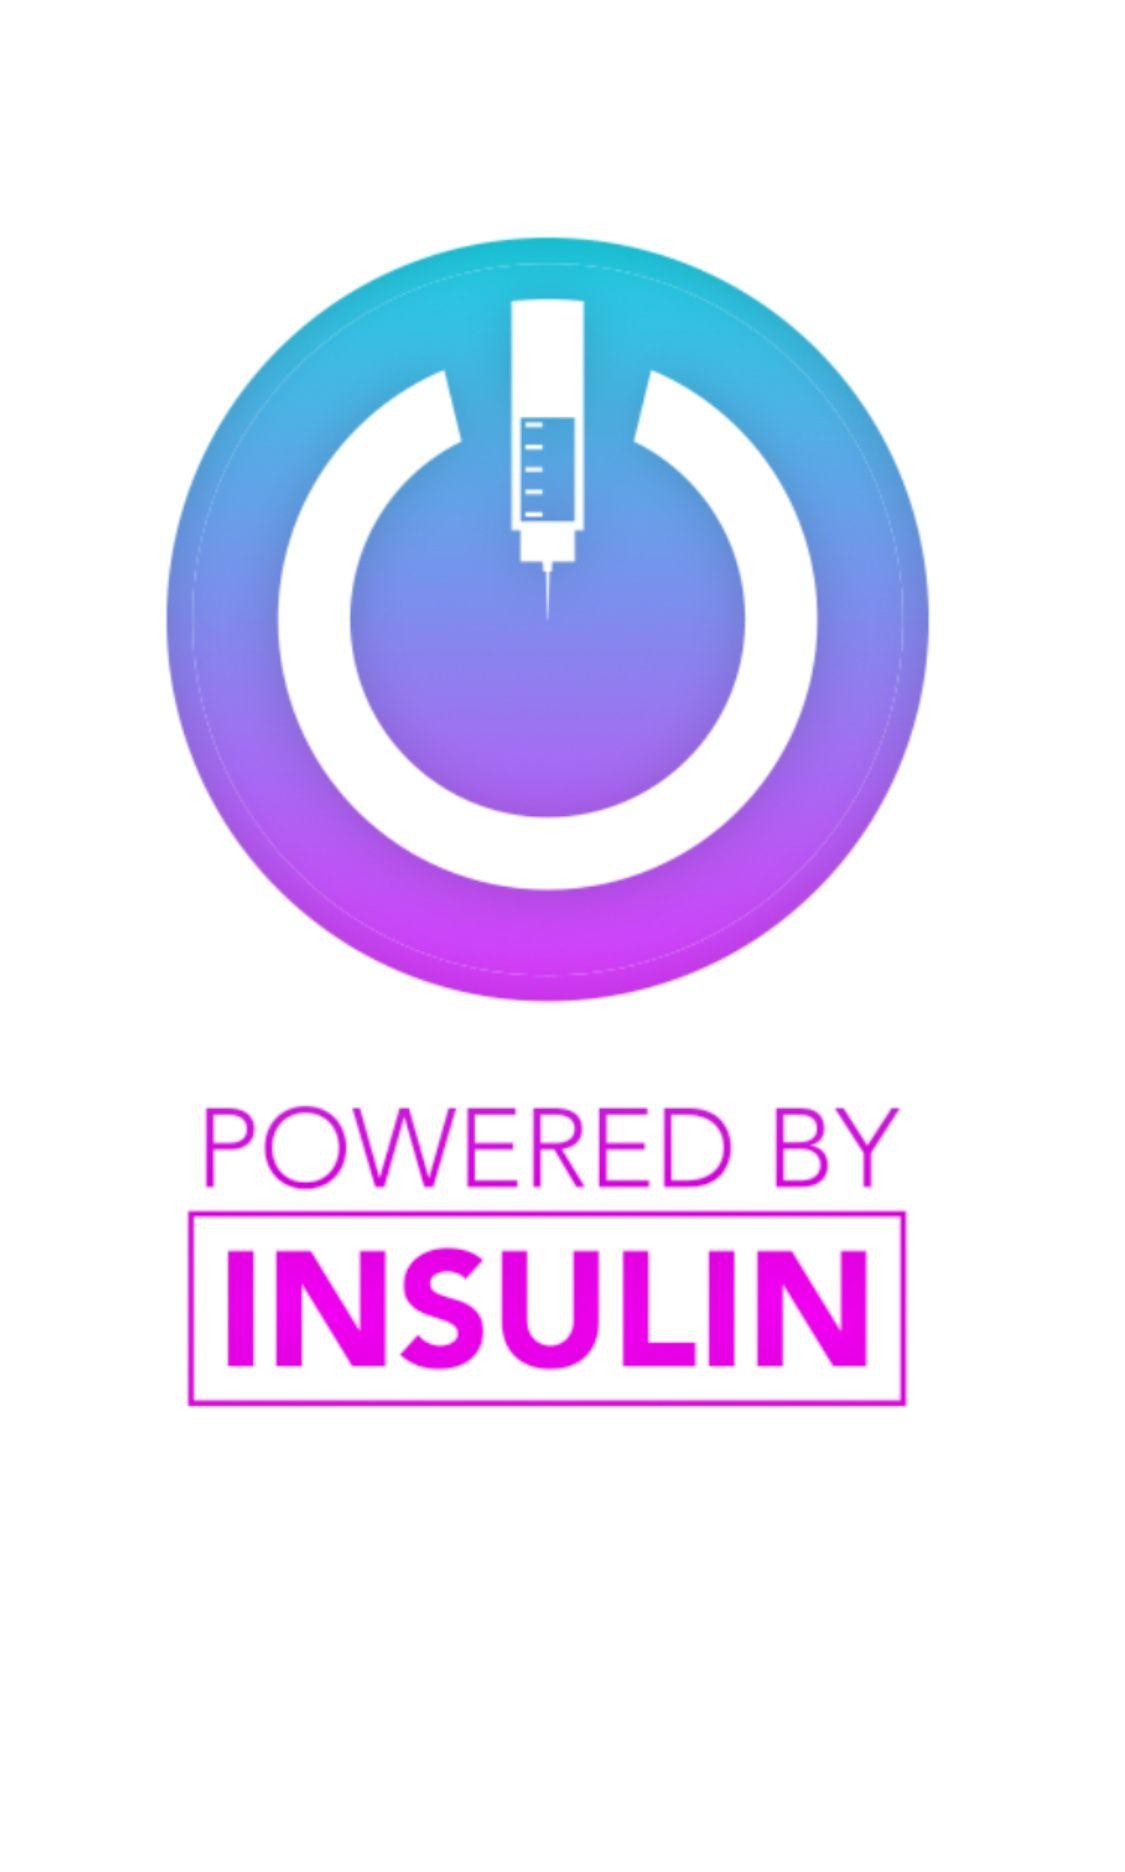 Insulin Logo - I want this logo printed on a shirt...... | T1D | Type one diabetes ...